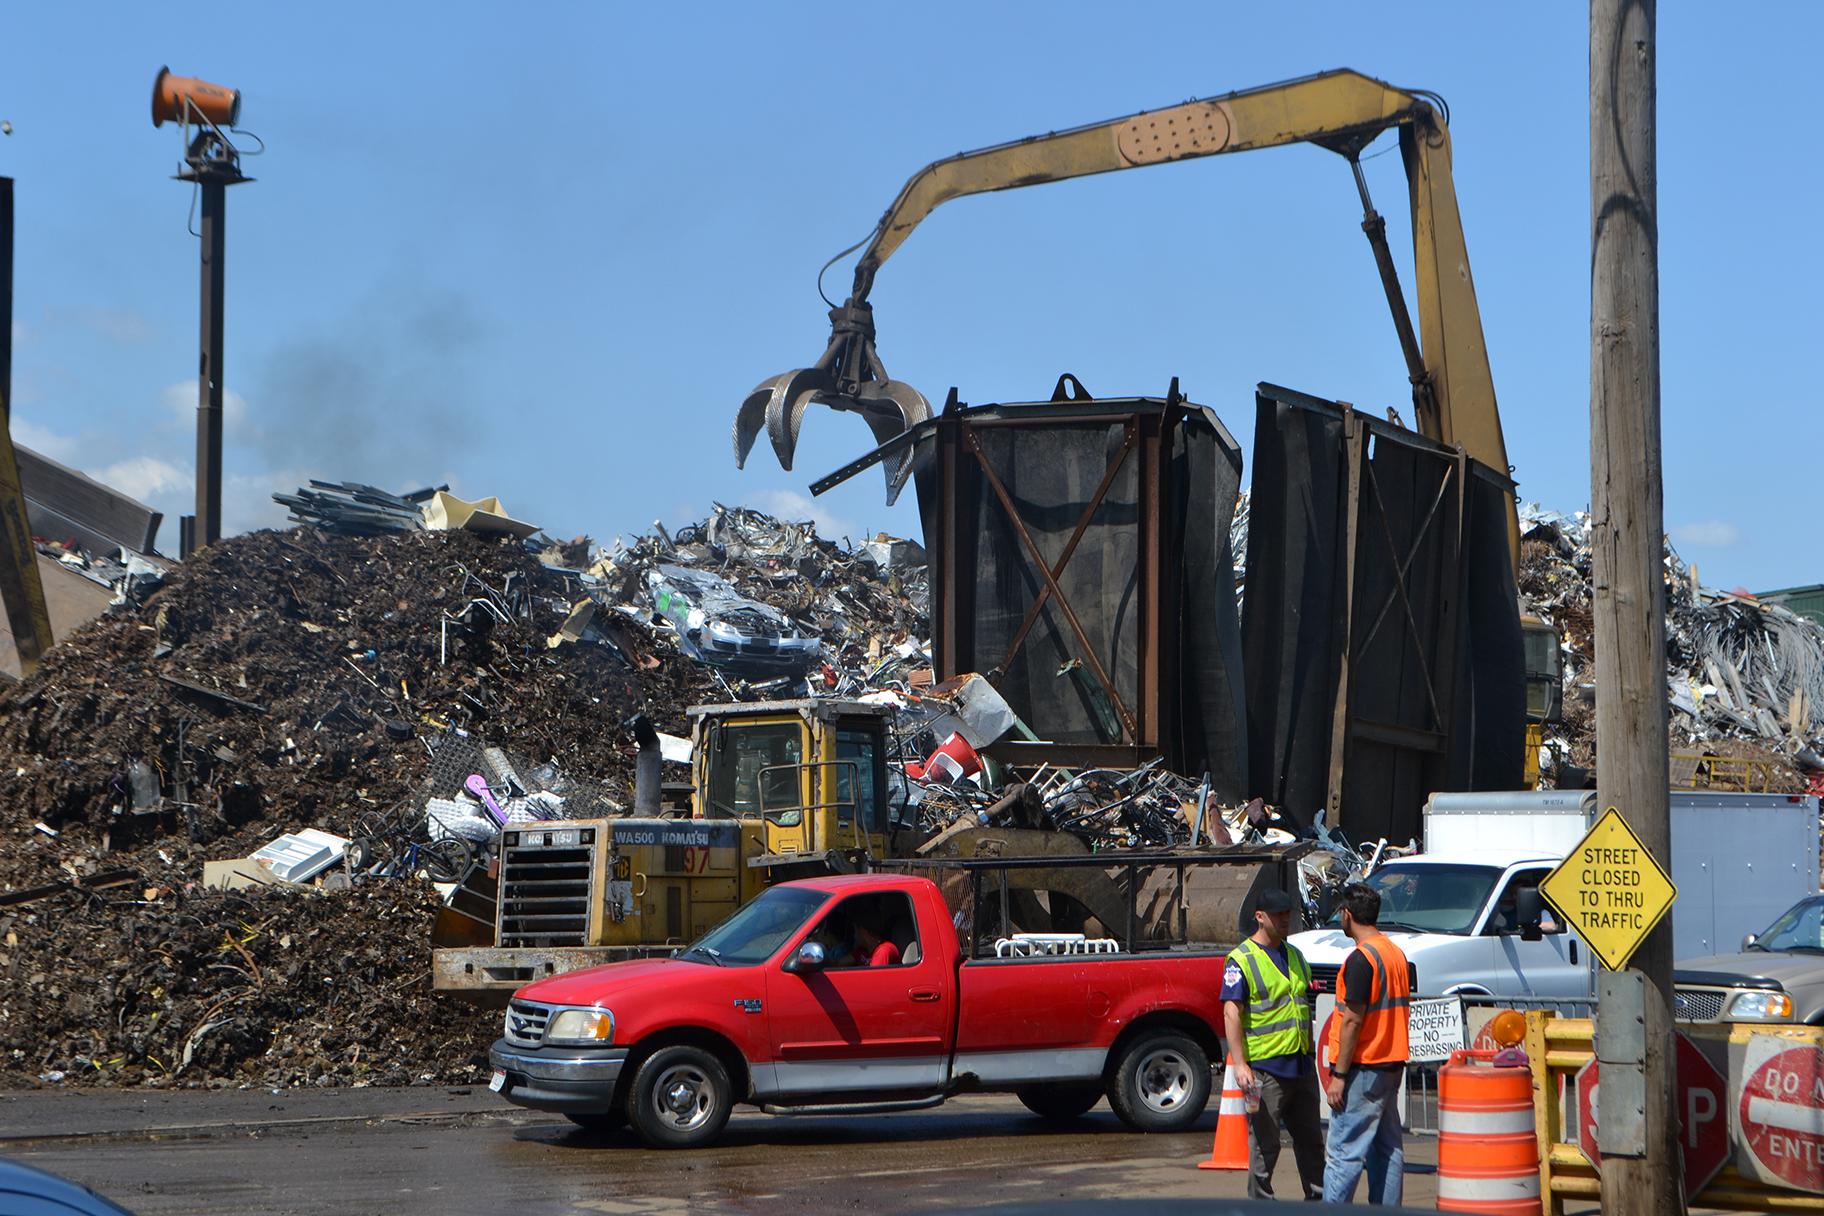 General Iron’s scrap metal yard at 1909 N. Clifton Ave. in Lincoln Park. (Alex Ruppenthal / WTTW News) 